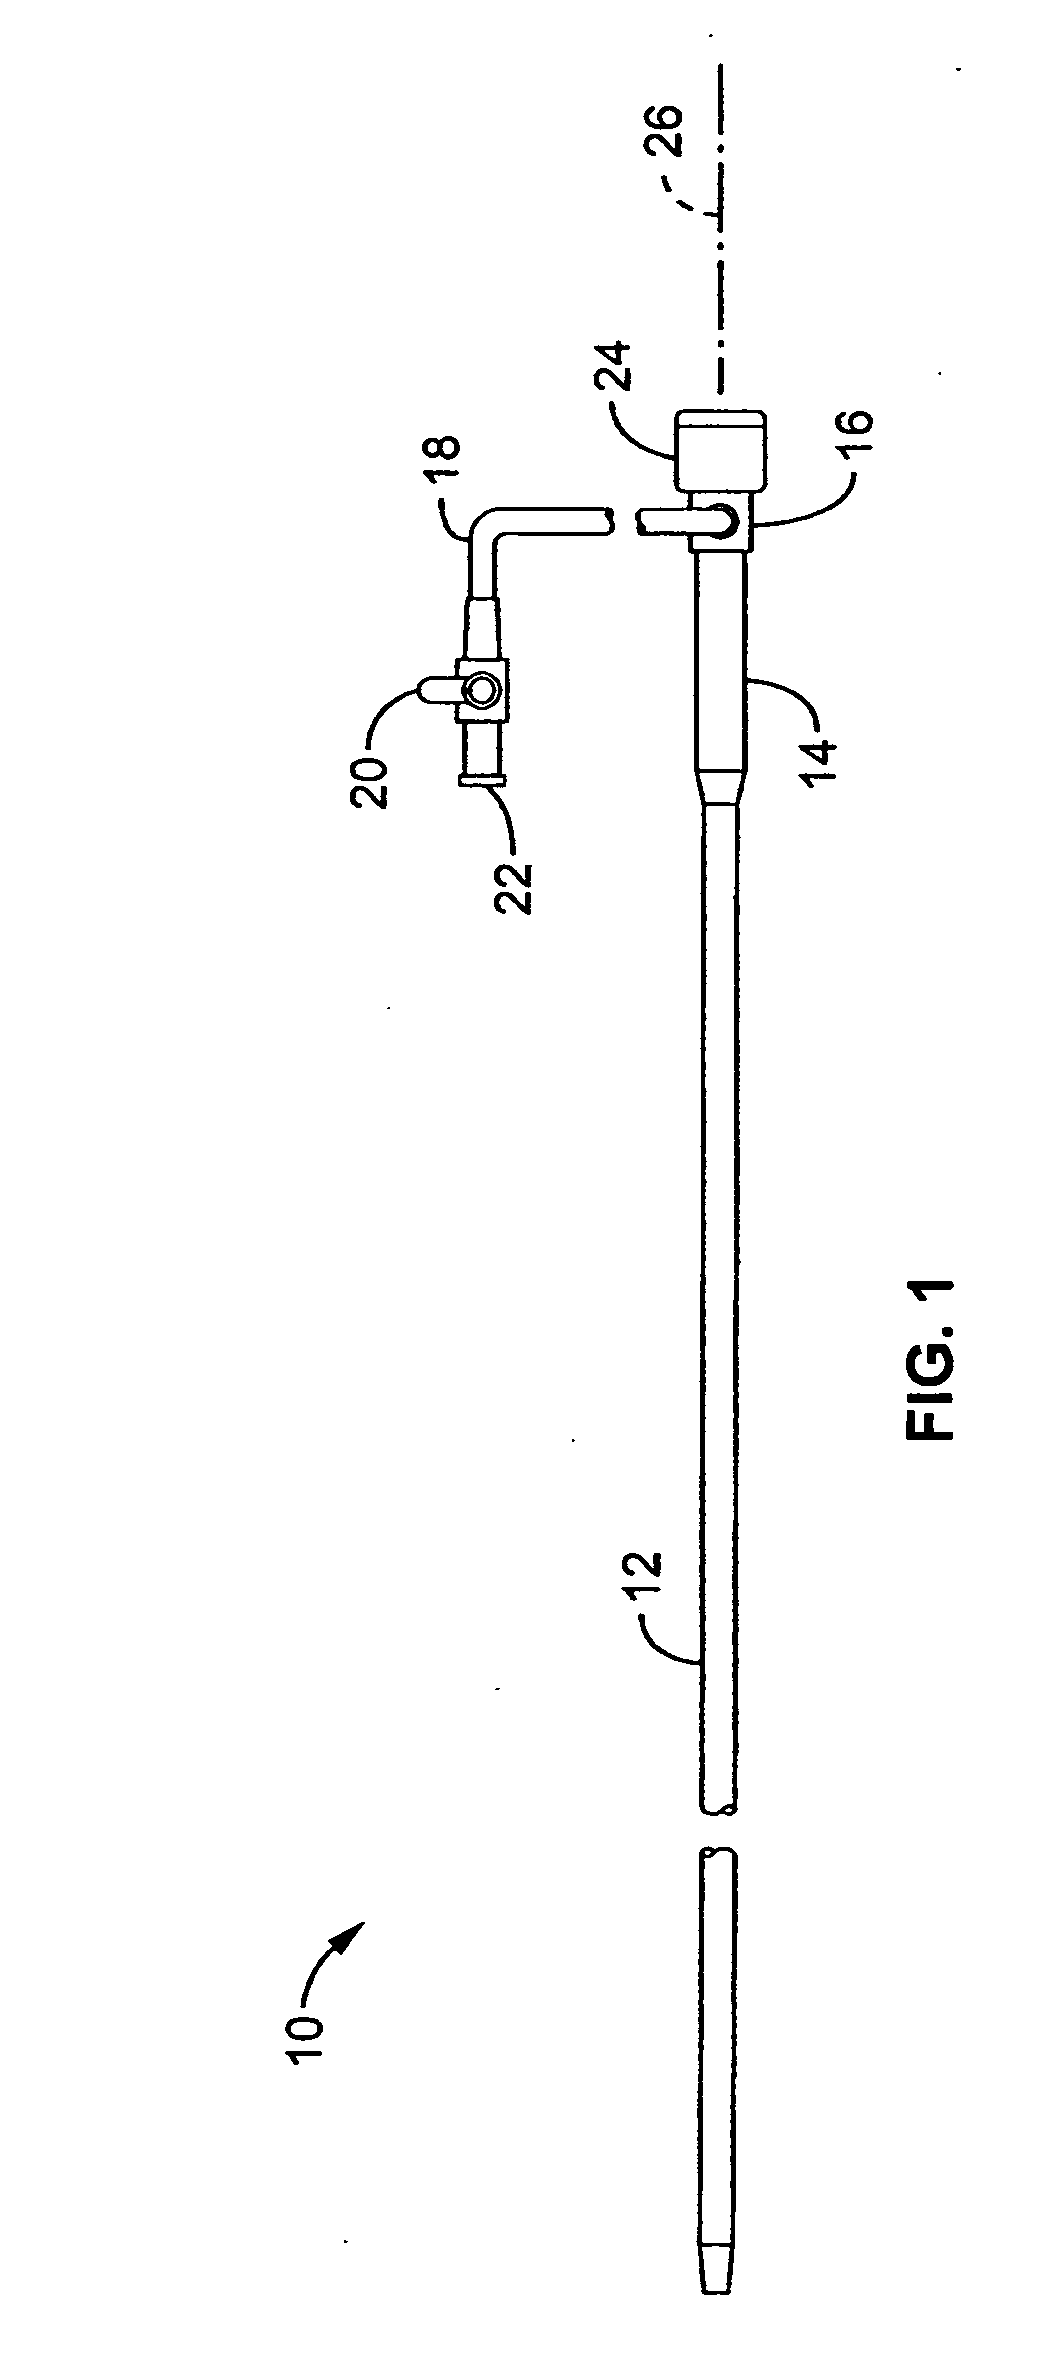 Apparatus and method for inserting an intra-aorta catheter through a delivery sheath